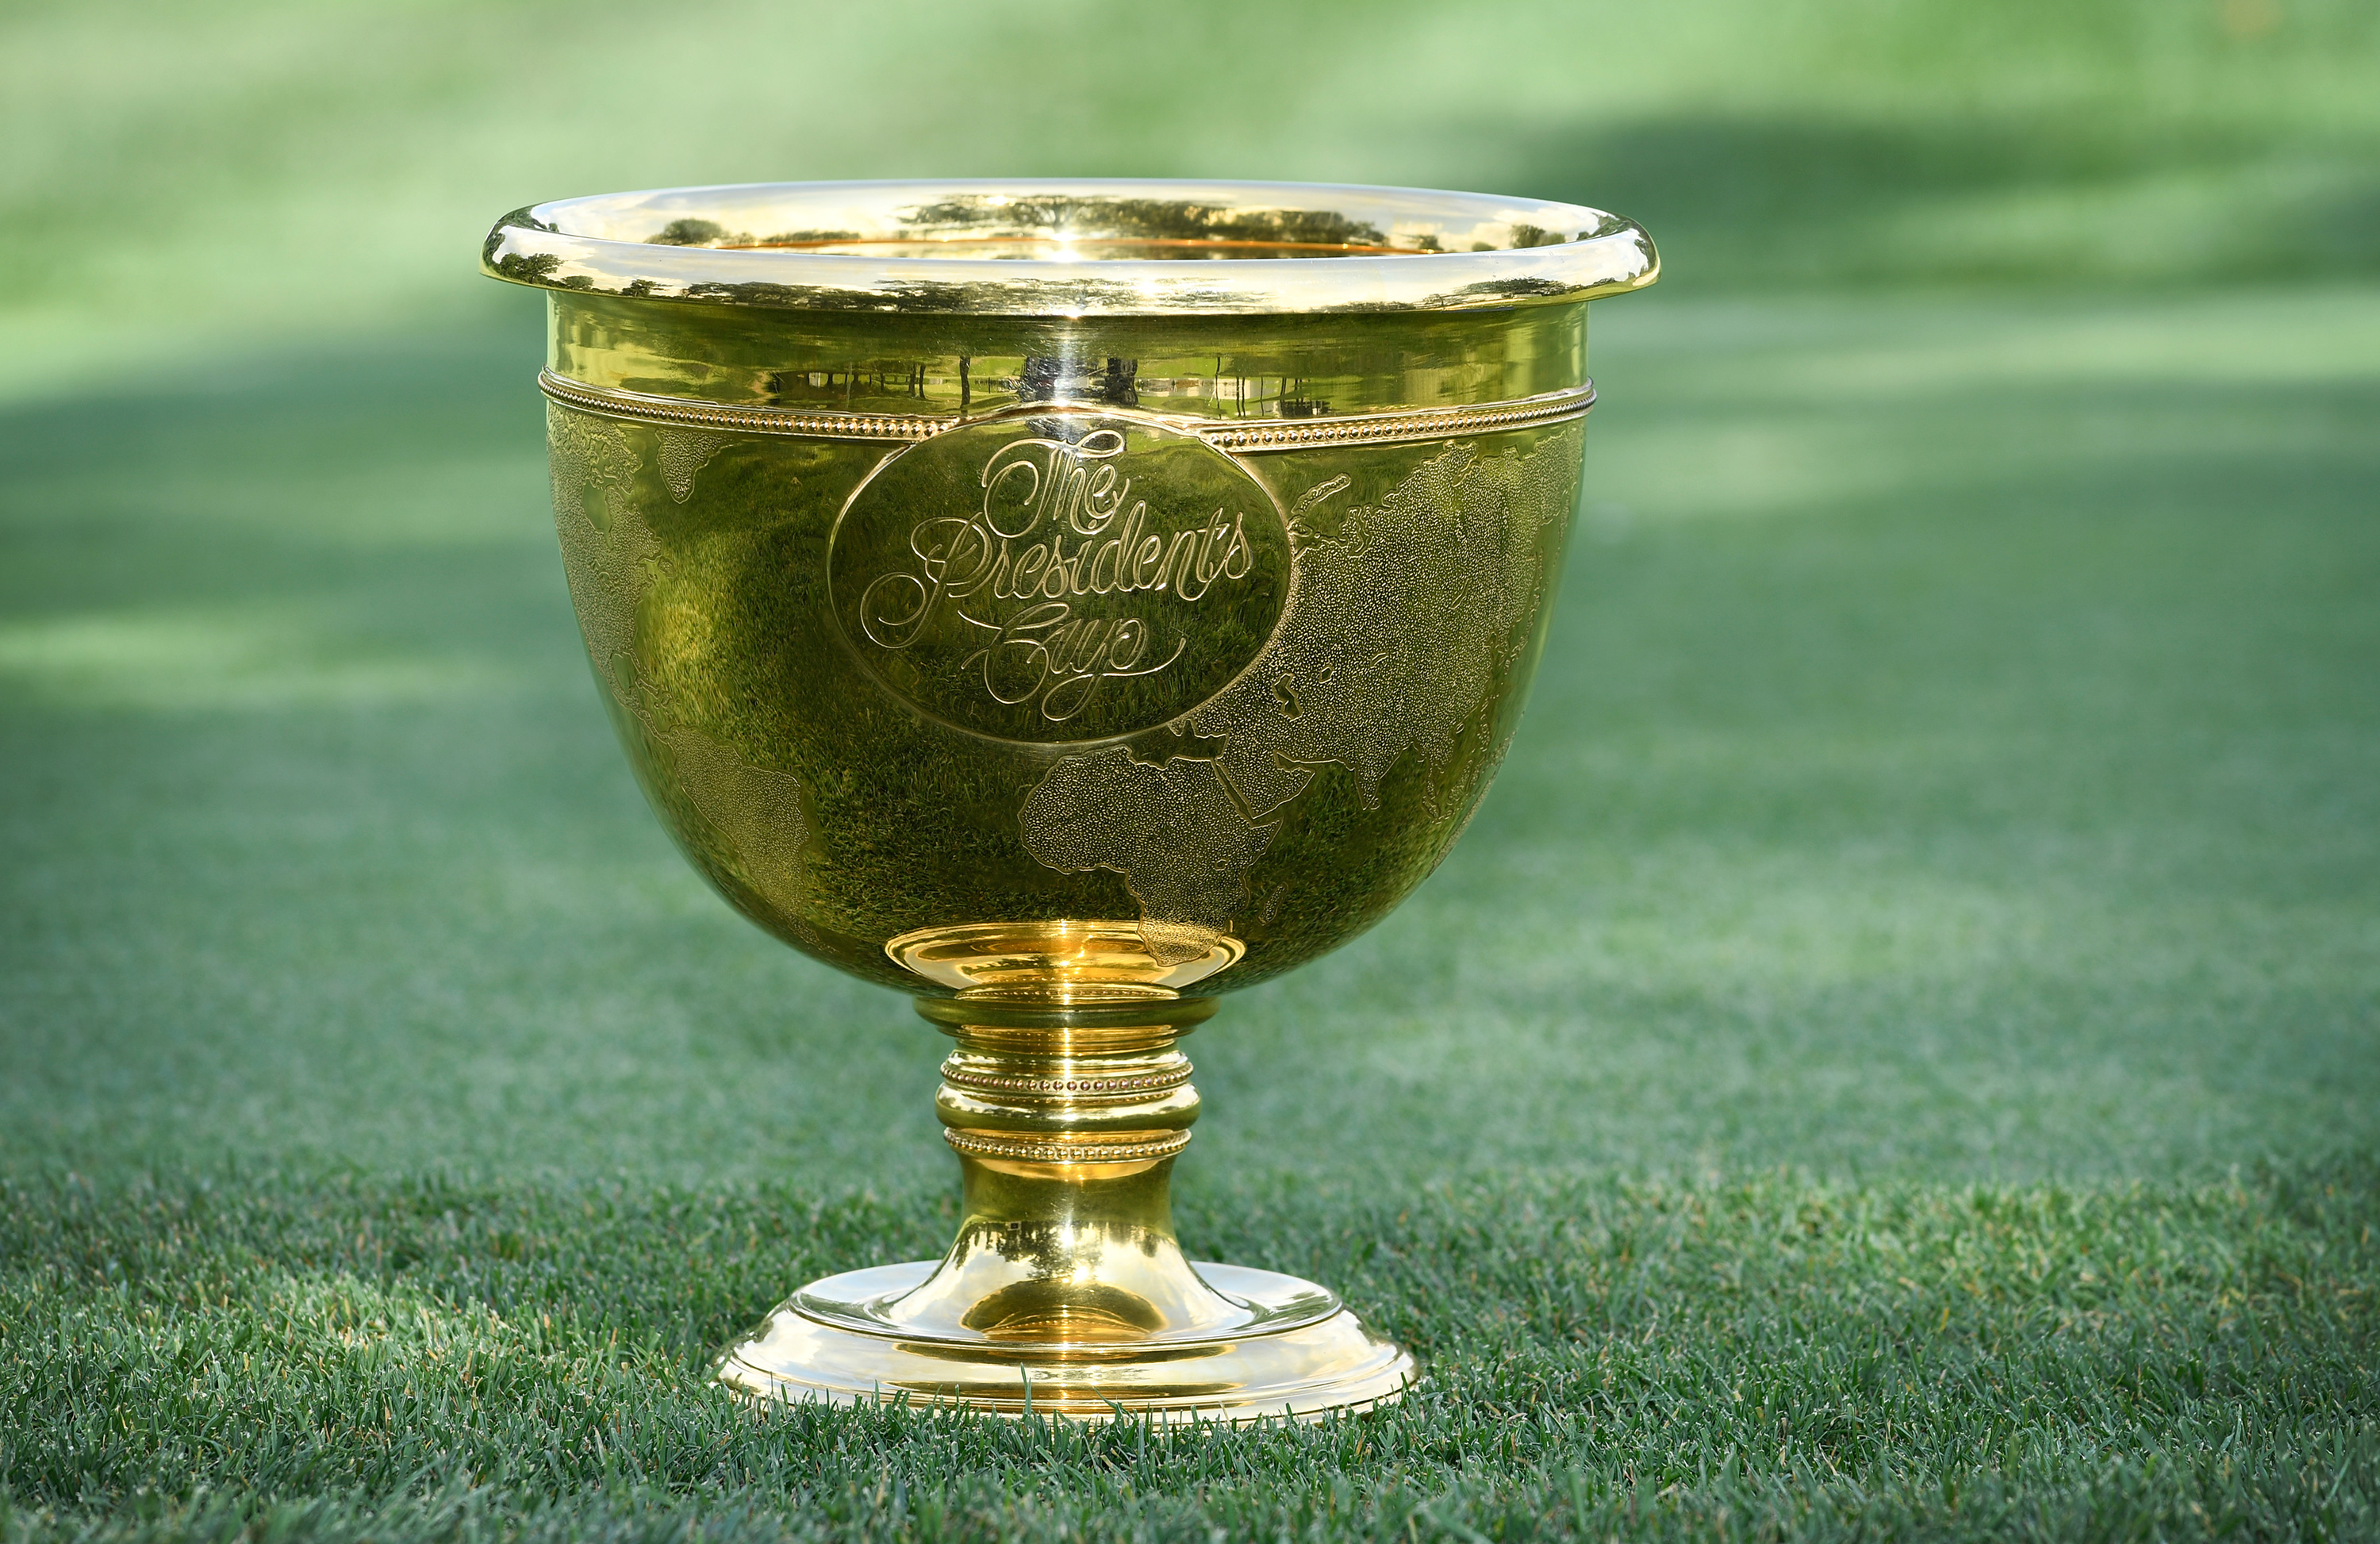 presidents cup 2022 watch online